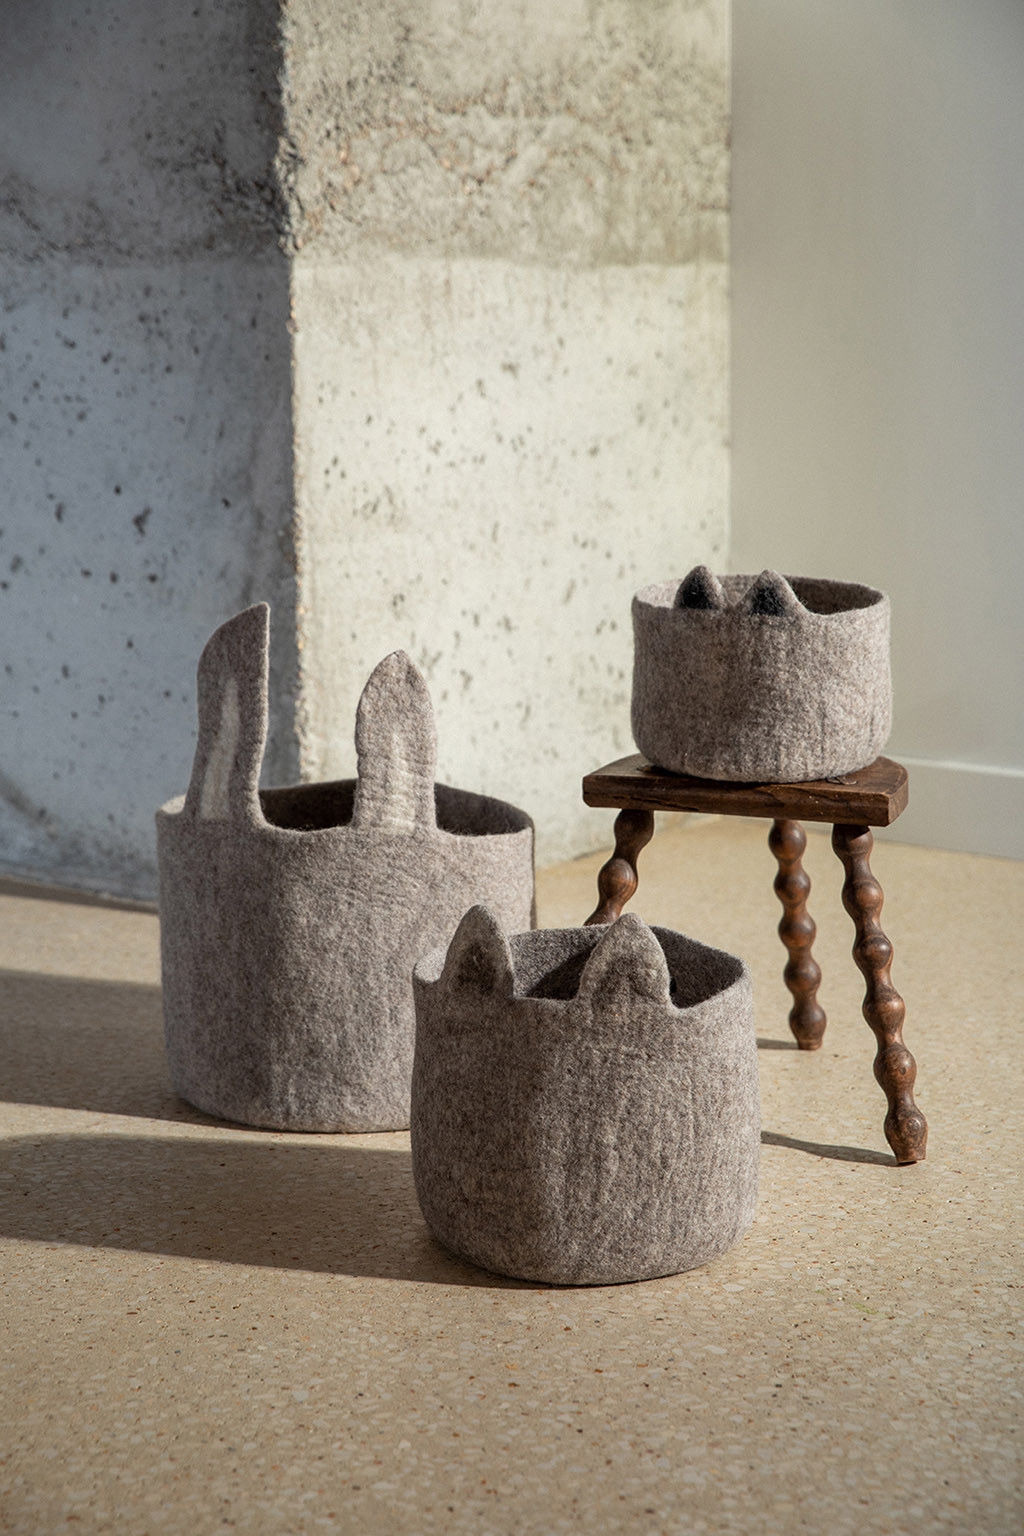 3 felt baskets with animal ears to decorate a child's room